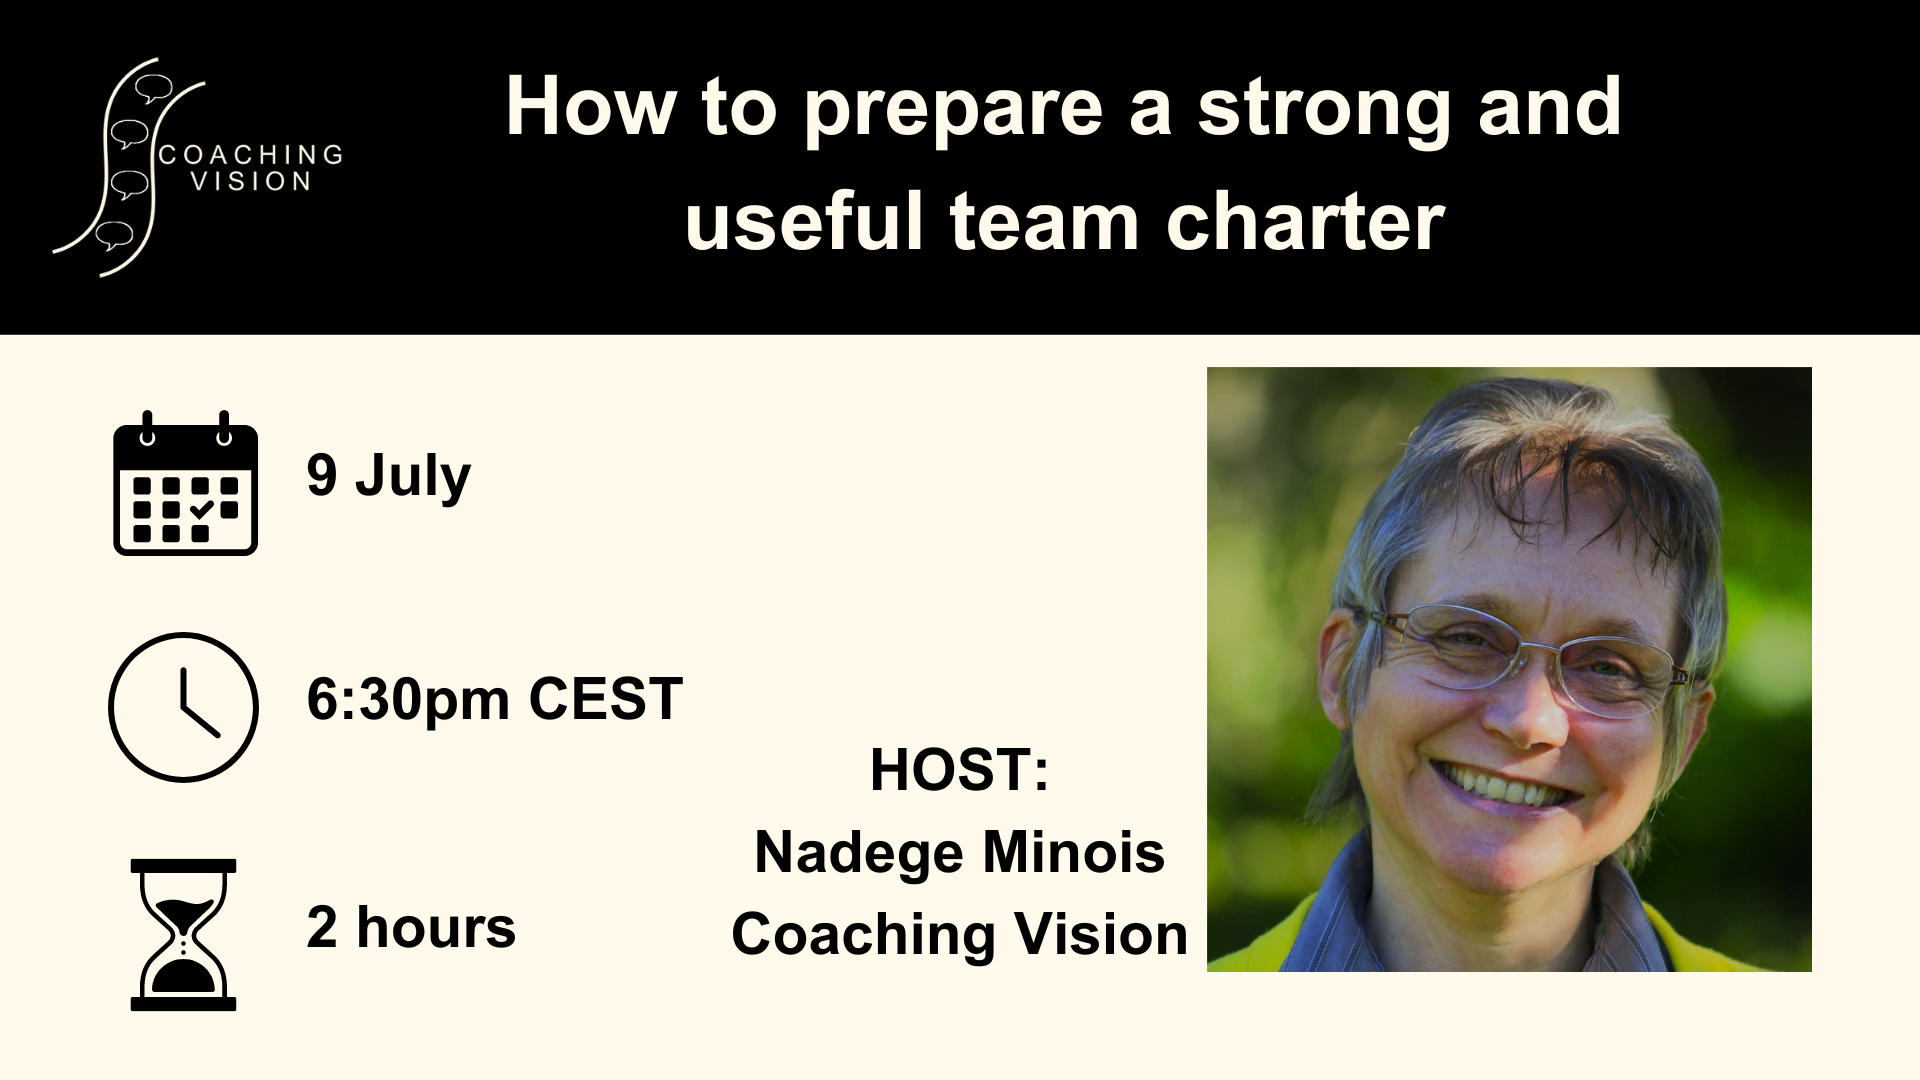 How to prepare a strong and useful team charter